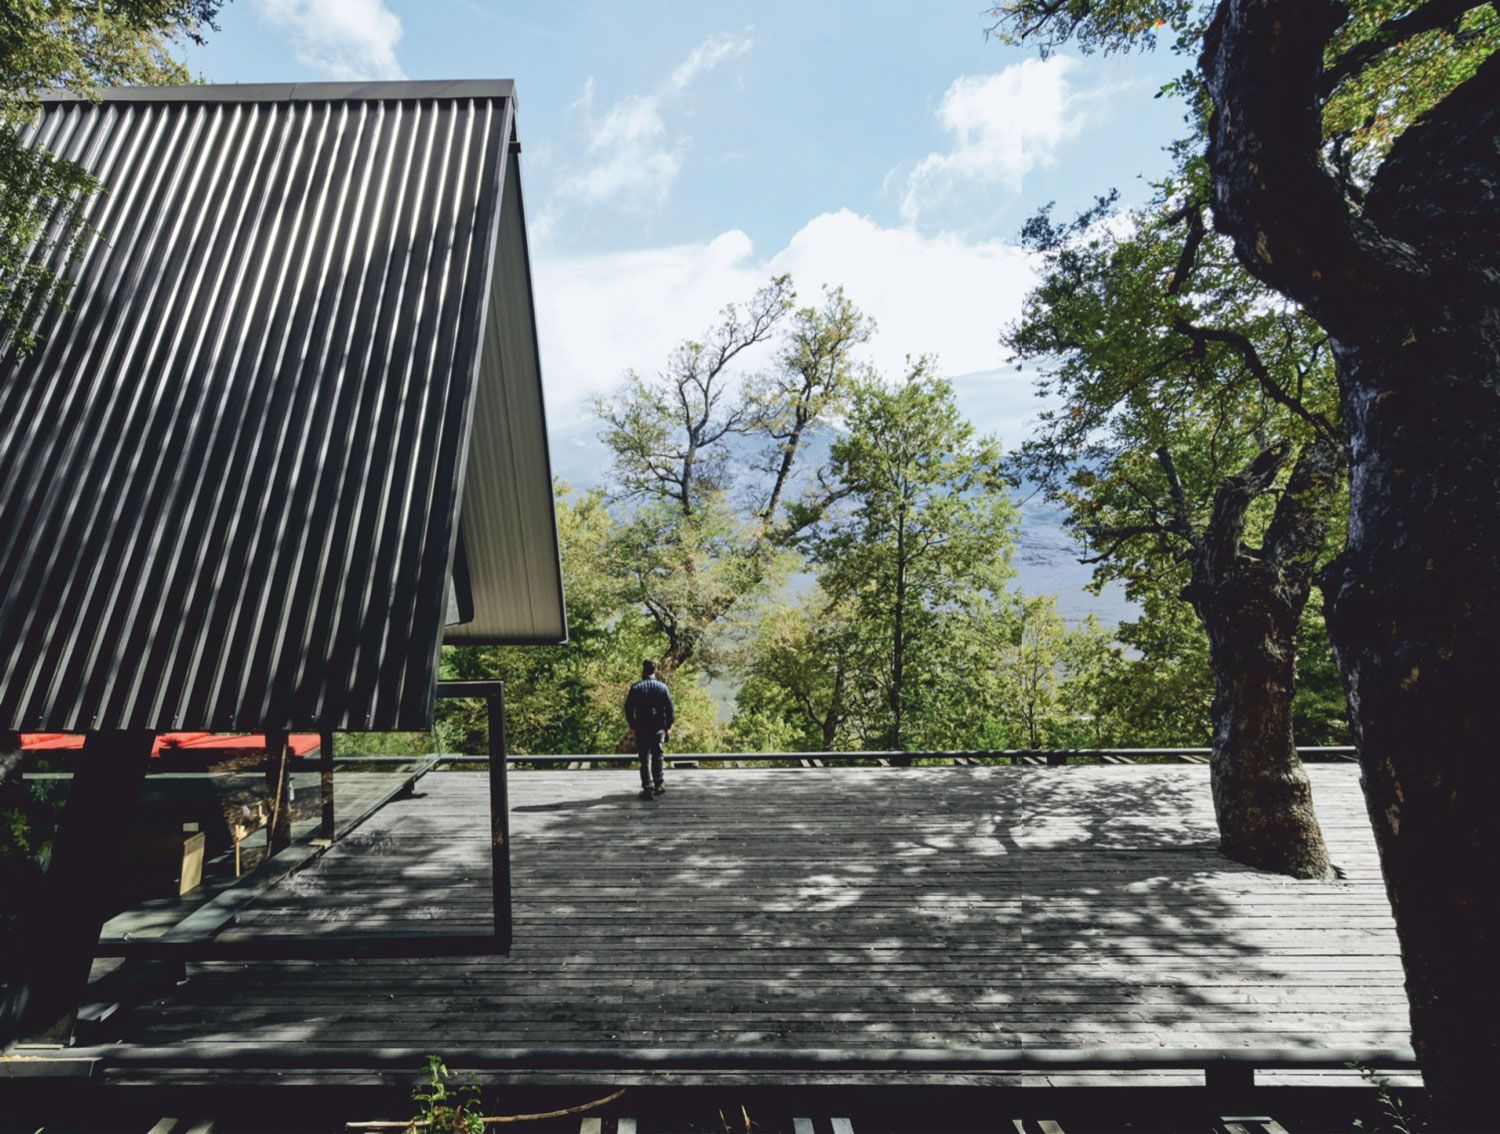 Stunning Chilean home references Kazuo Shinohara's Prism House